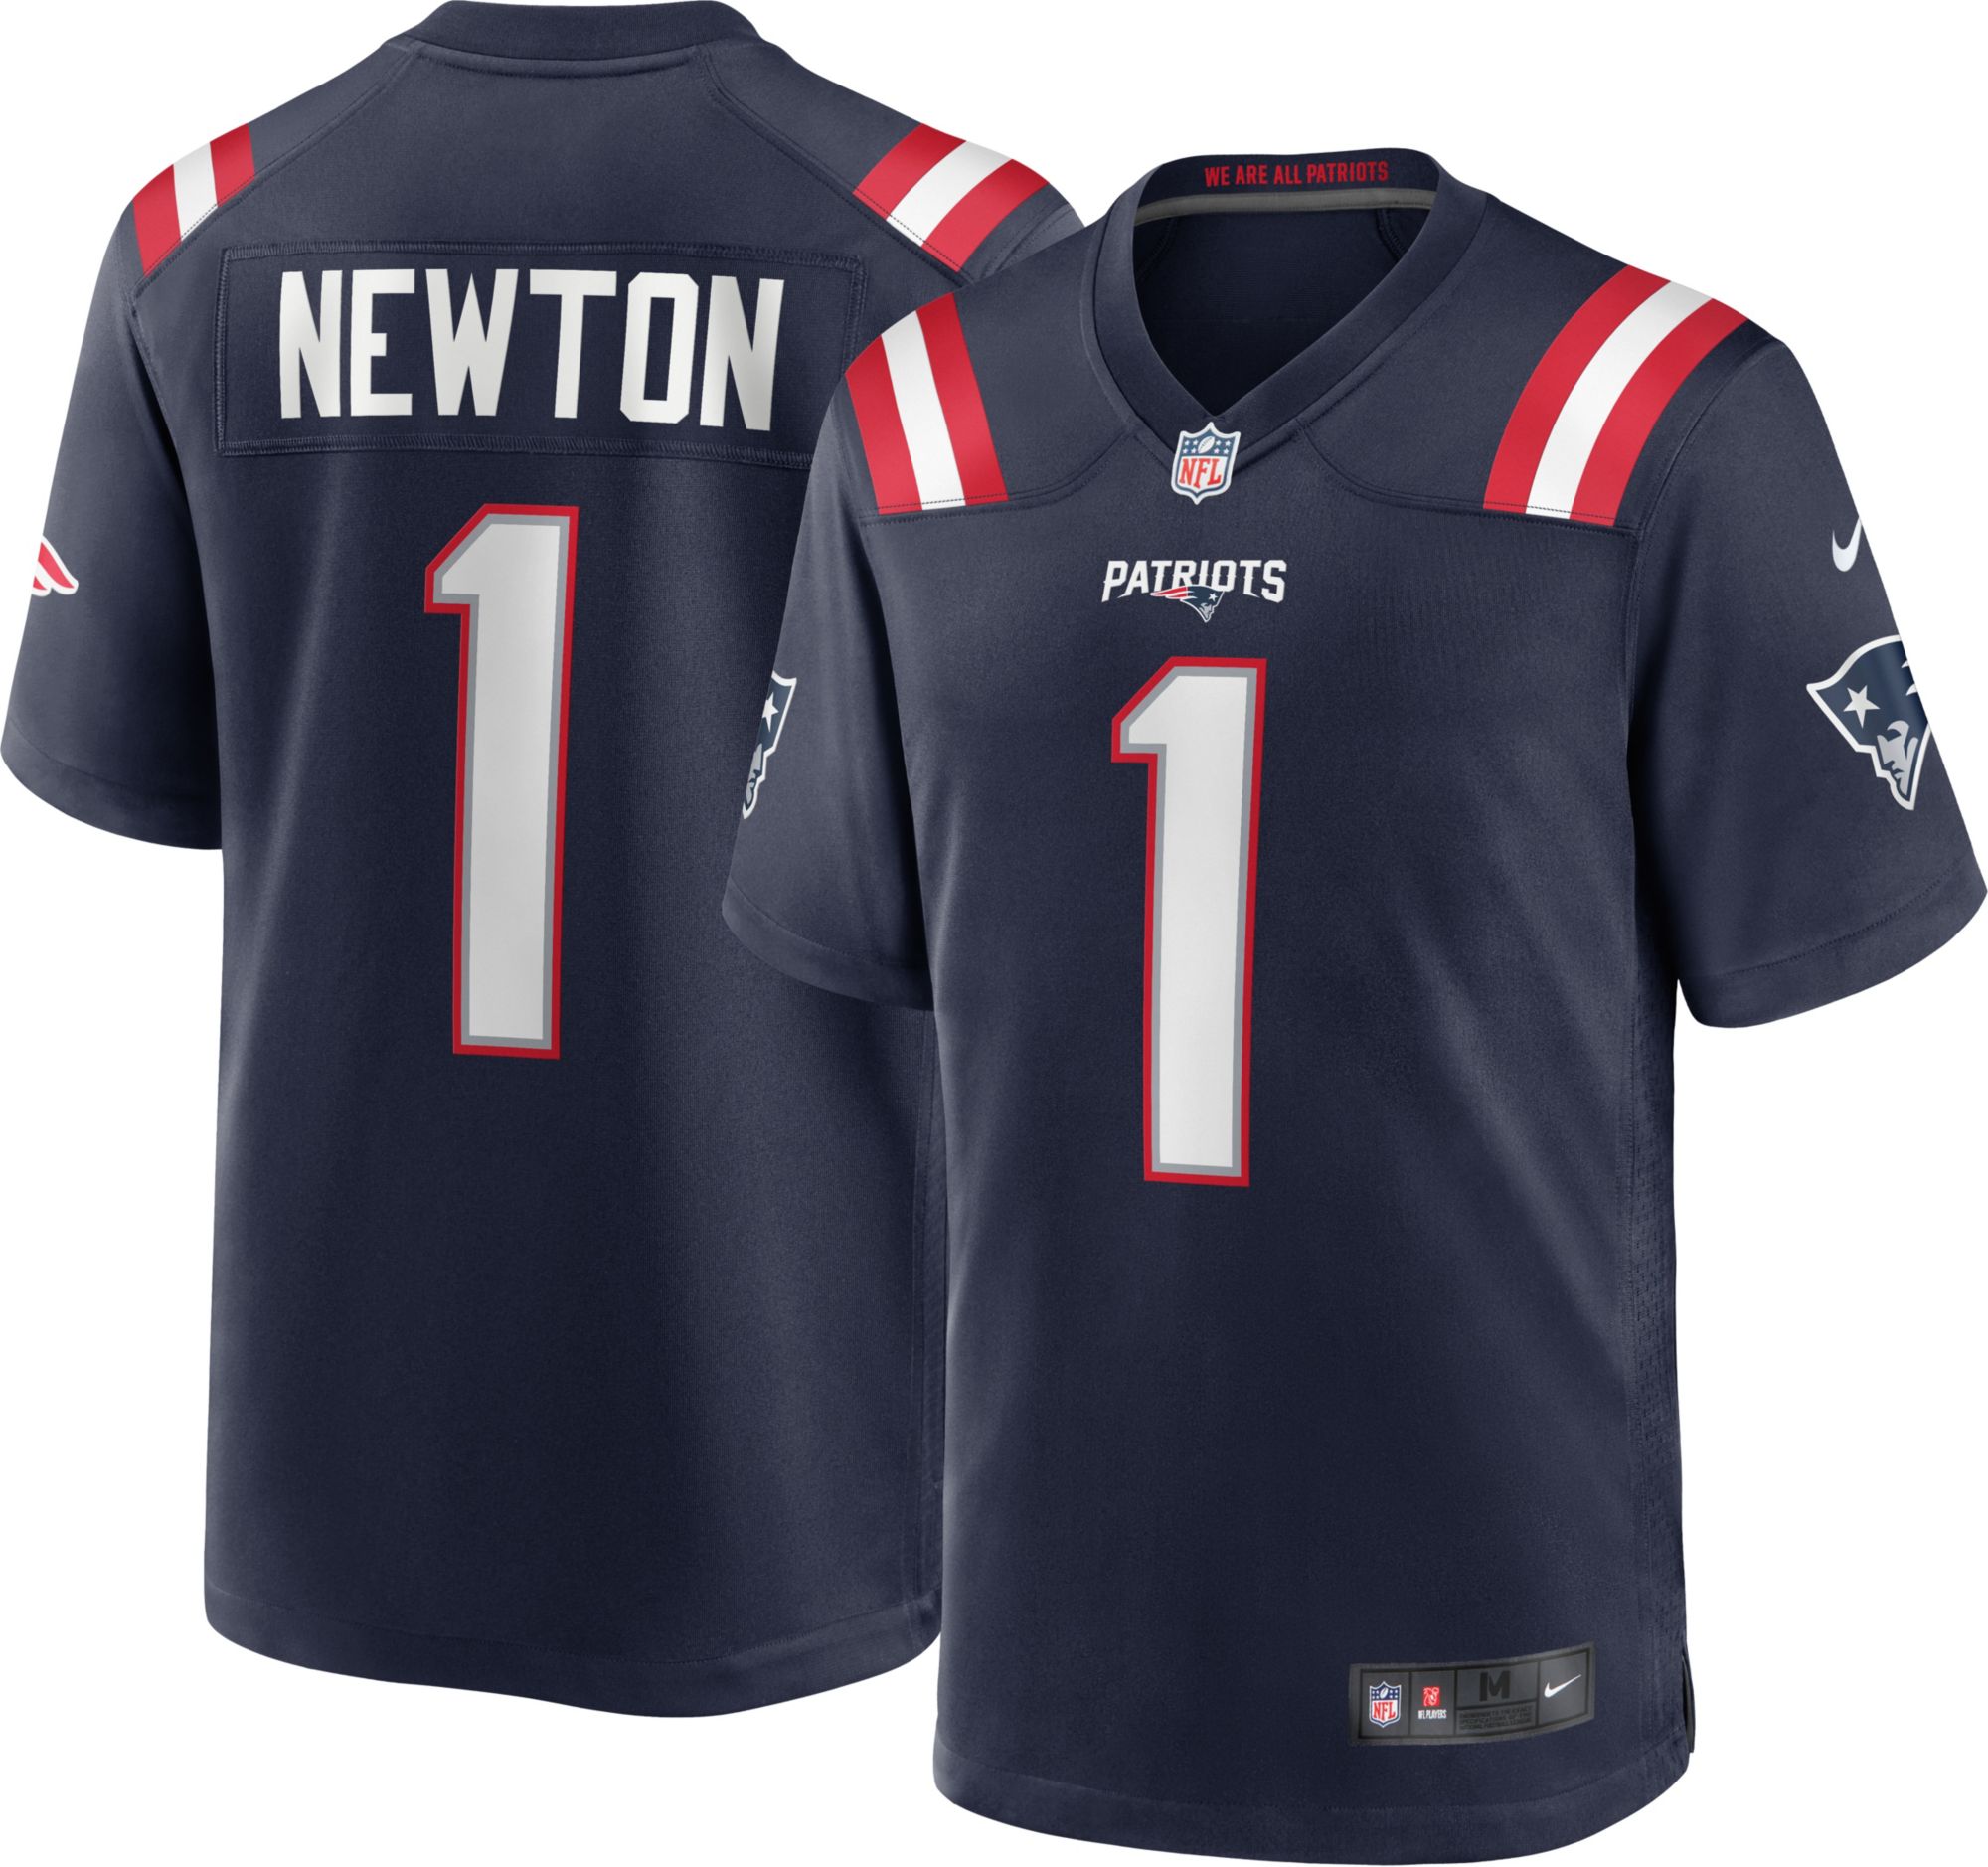 cam newton real jersey